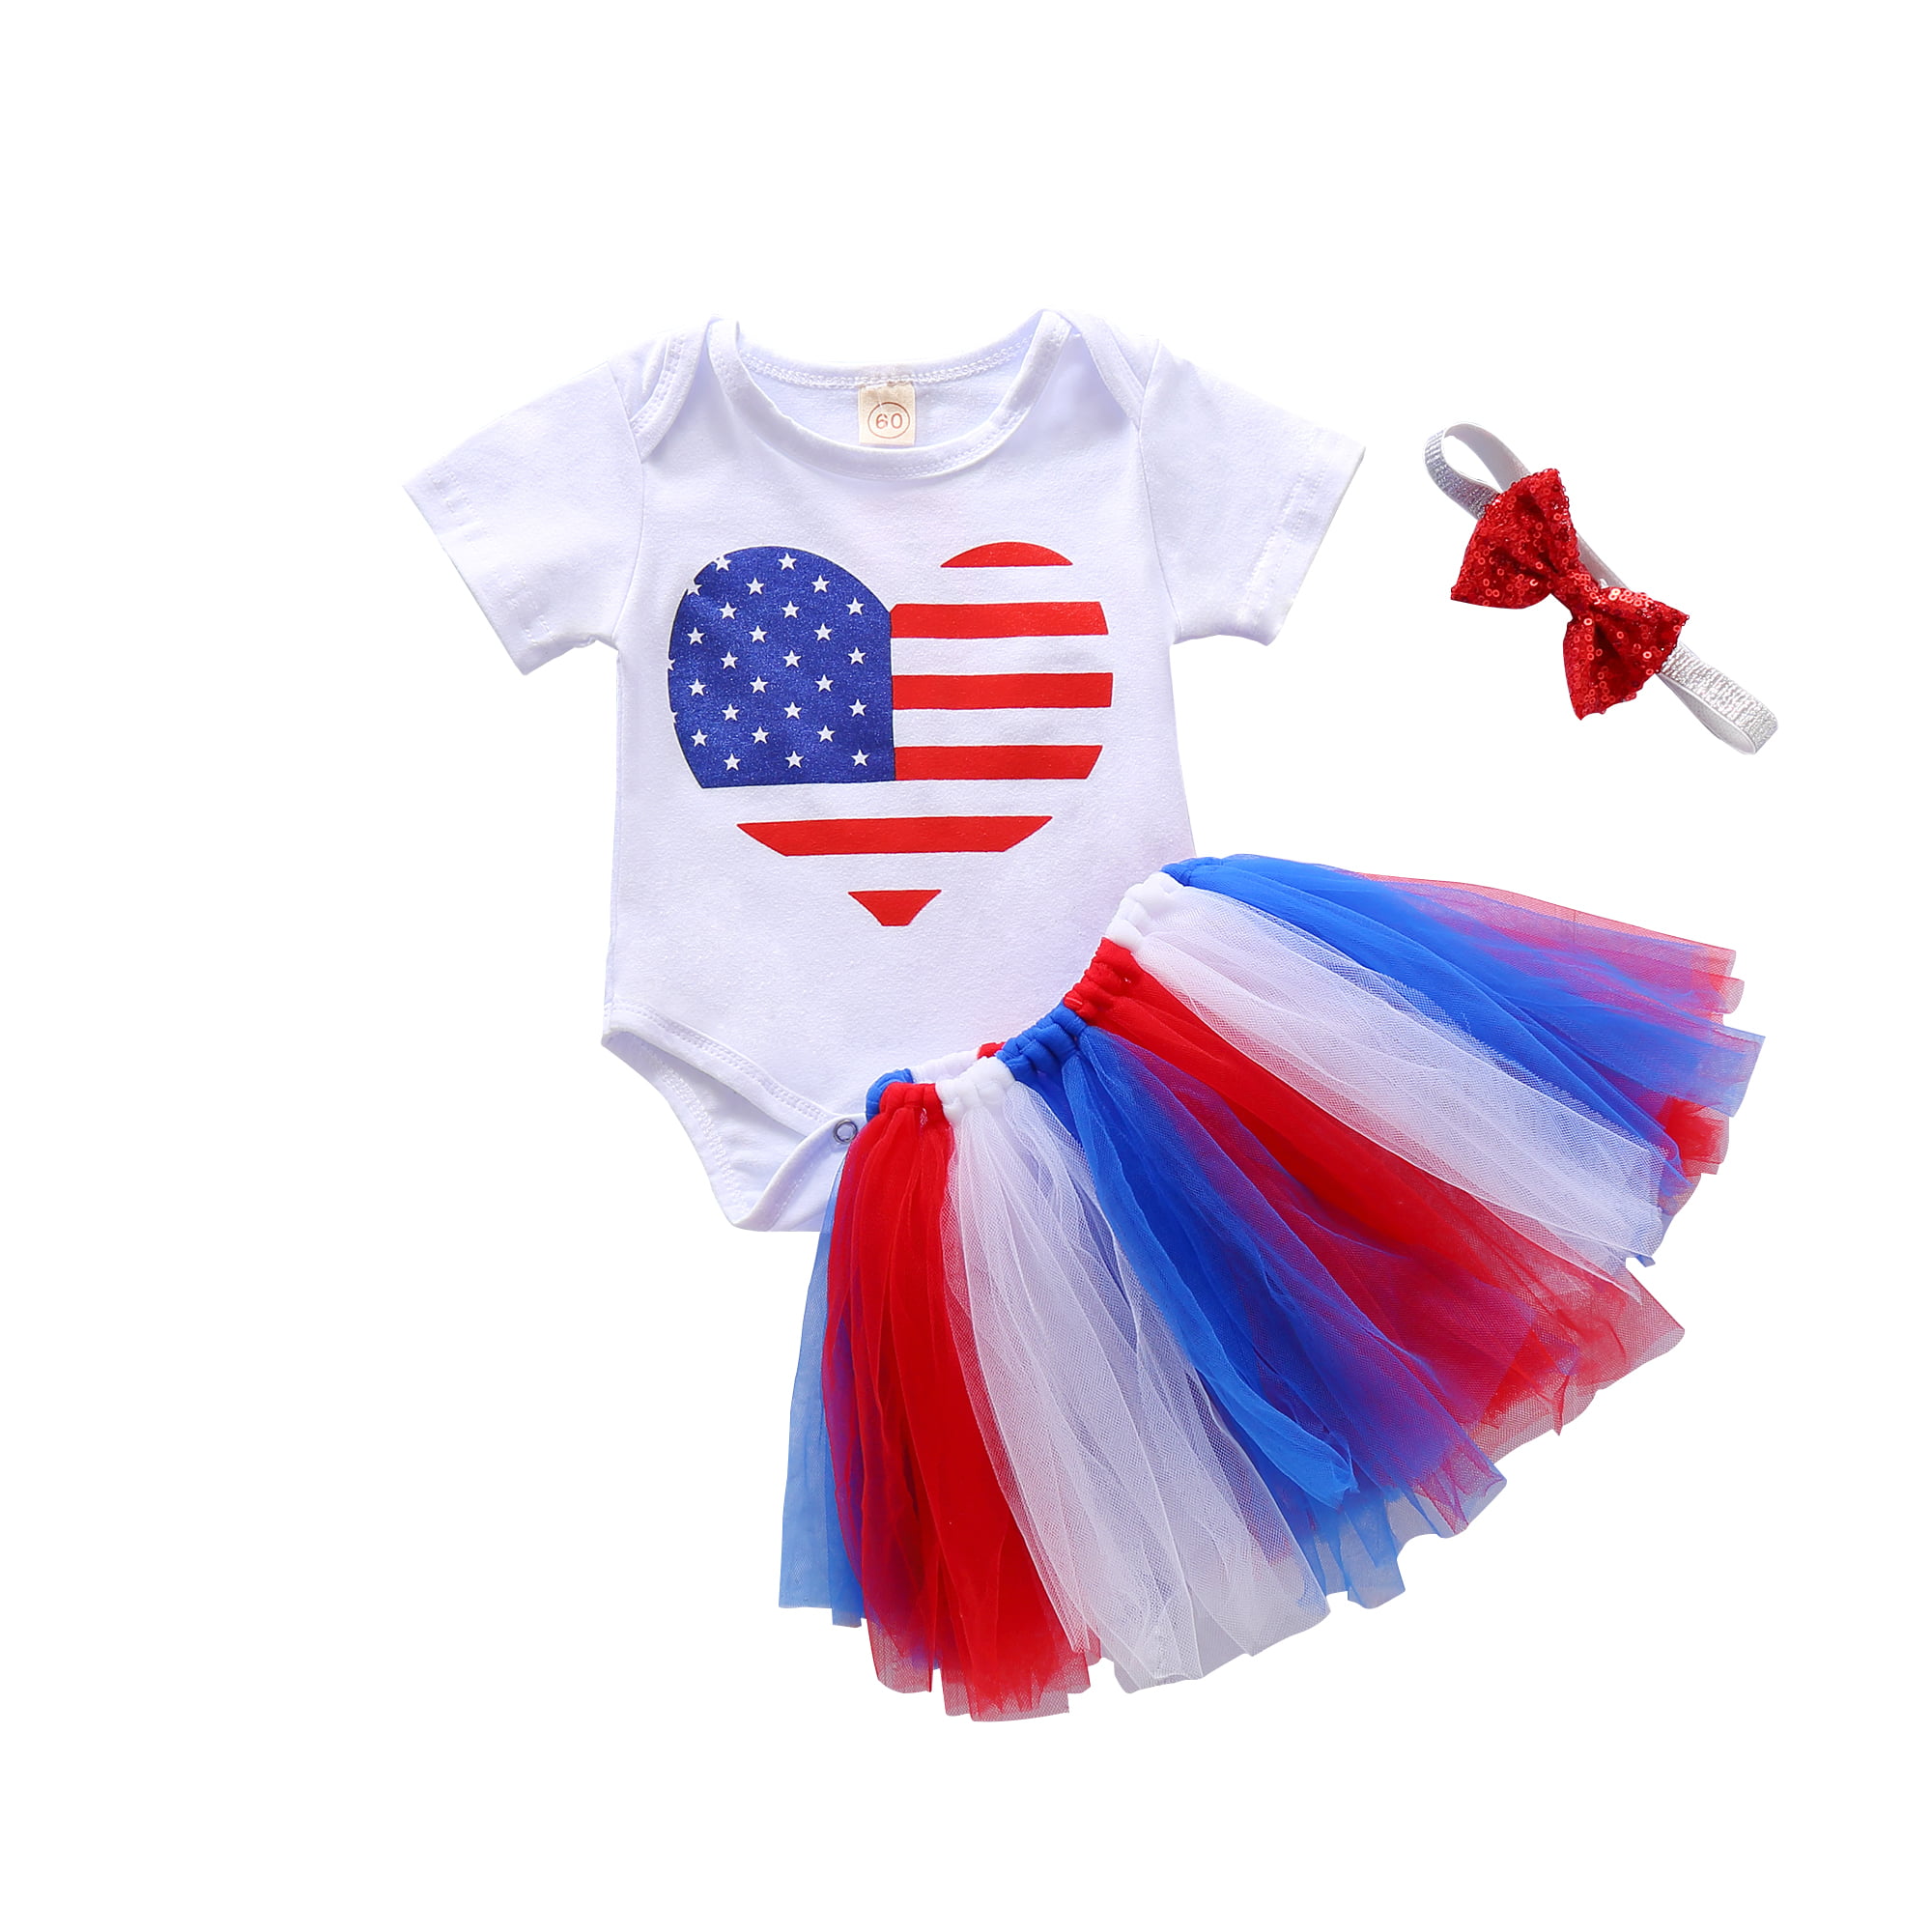 4PCS Baby Girls First 4th of July Tutu Skirt Dress Romper Socks Outfits Clothes 